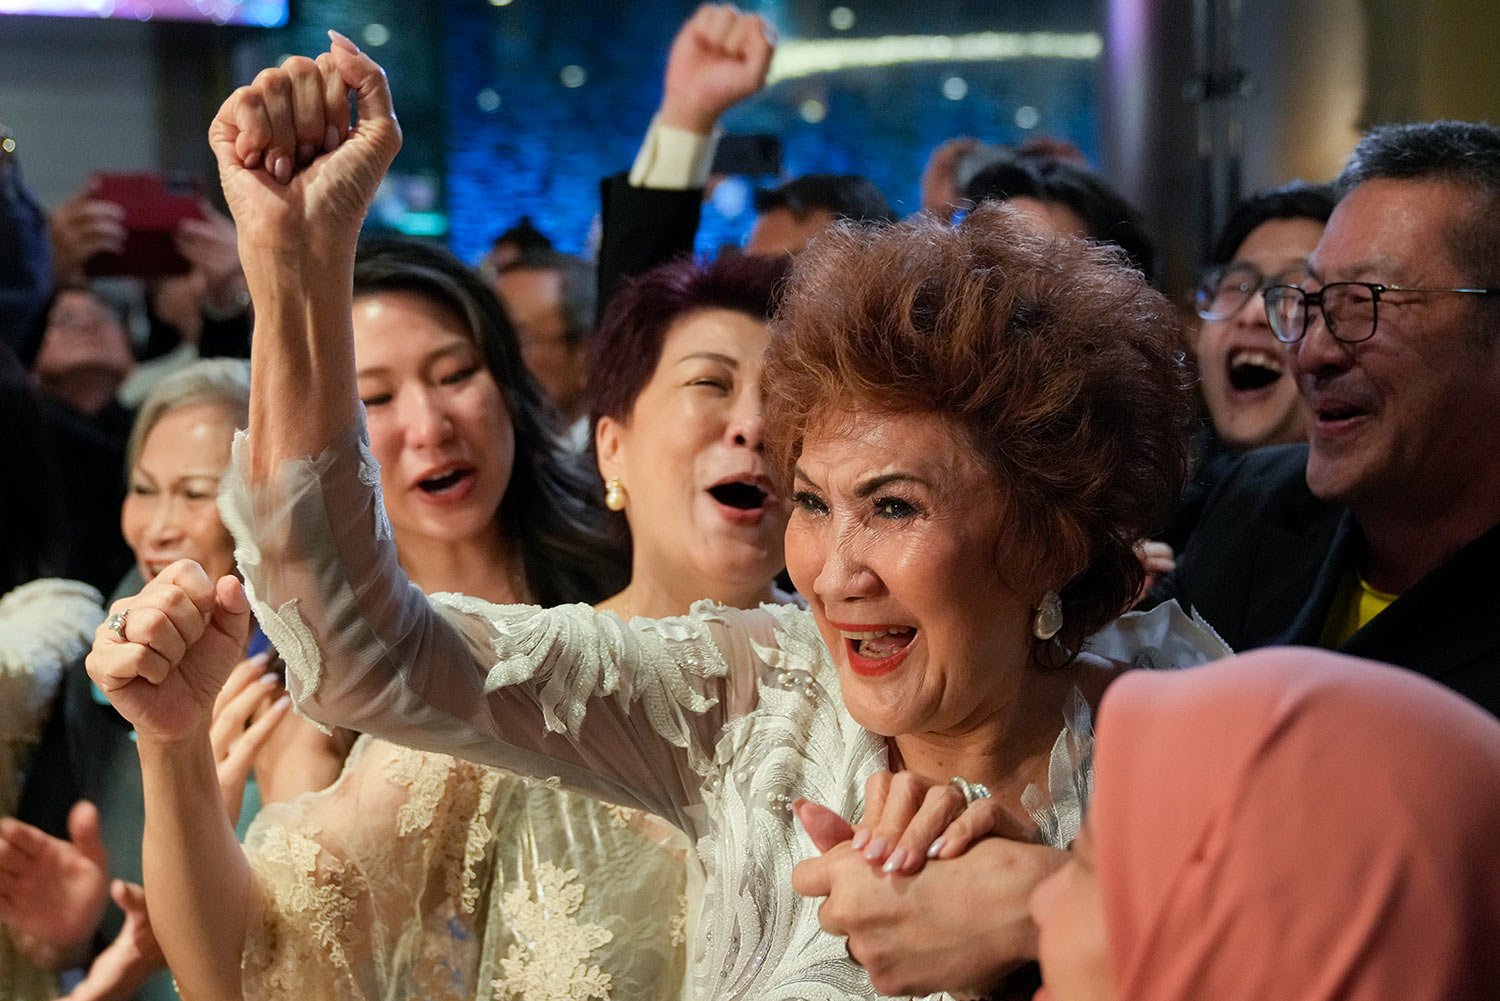  Janet Yeoh, mother of Michelle Yeoh, celebrates after her daughter won in the best actress category during the 95th Academy Awards in Los Angeles, as seen in a live view event at a cinema in Kuala Lumpur, Malaysia, Monday, March 13, 2023. (AP Photo/